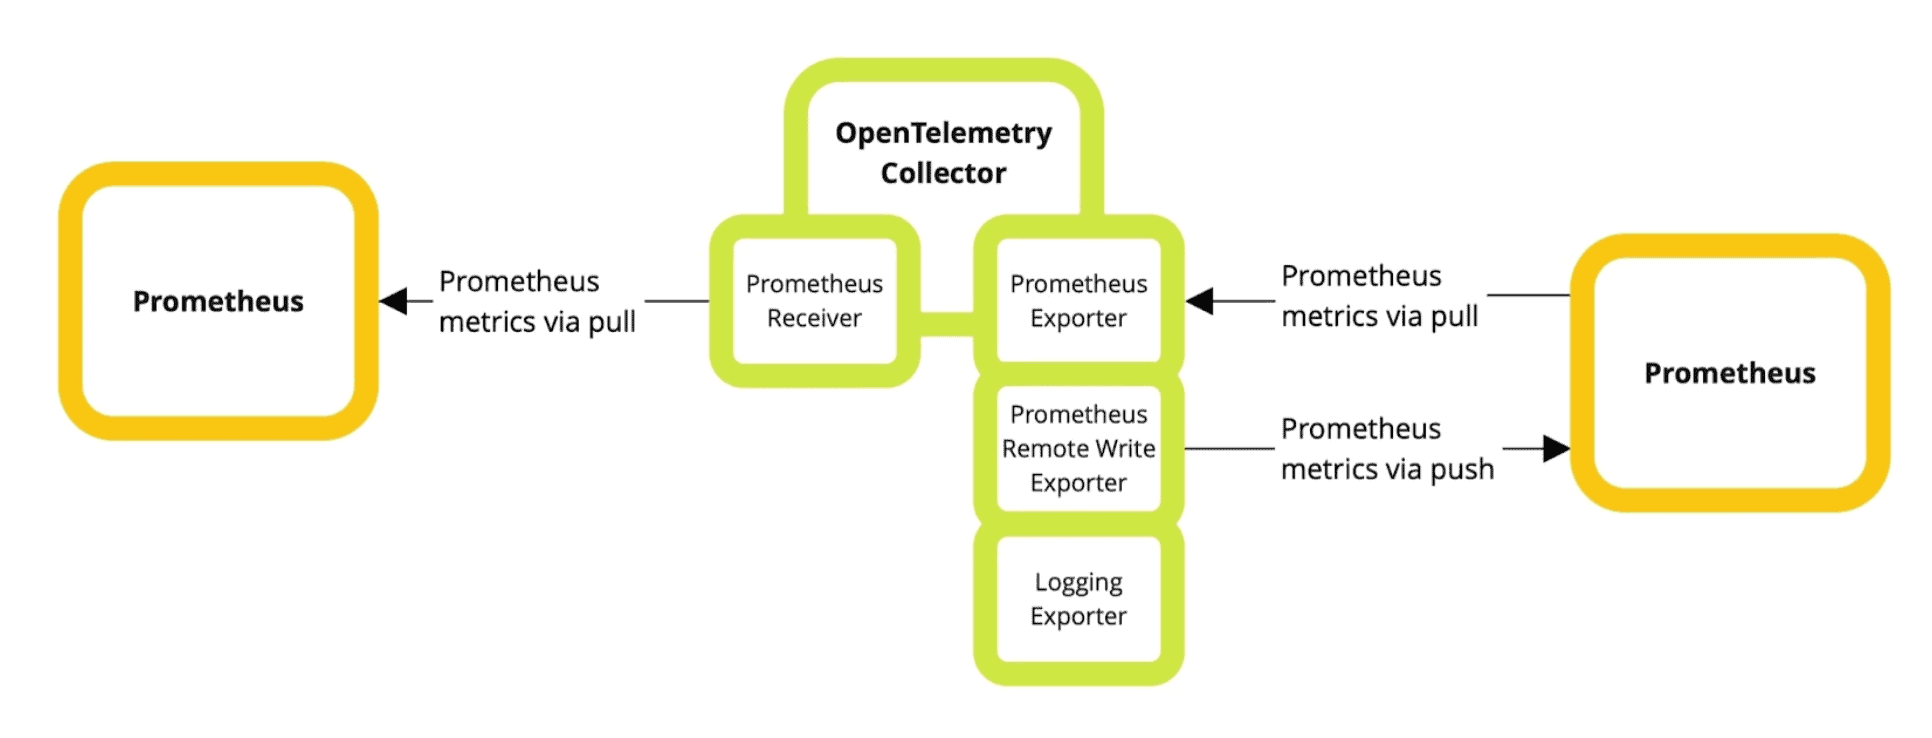 Diagram illustrating how Prometheus interacts with the OpenTelemetry Collector